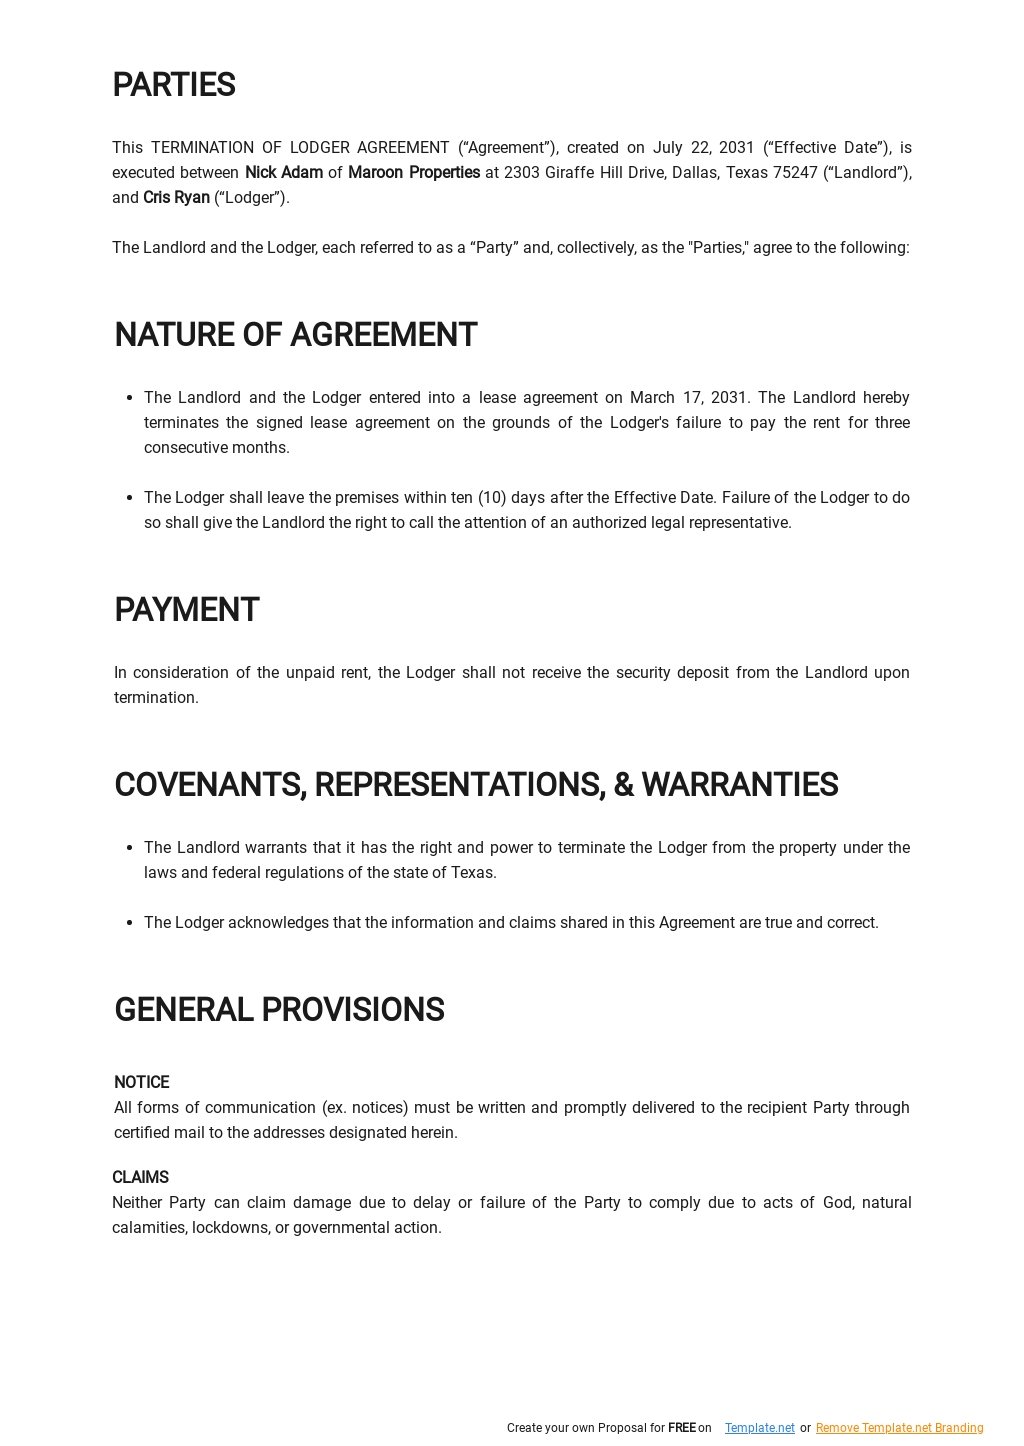 Termination Of Lodger Agreement Template - Google Docs, Word Throughout termination of lodger agreement template